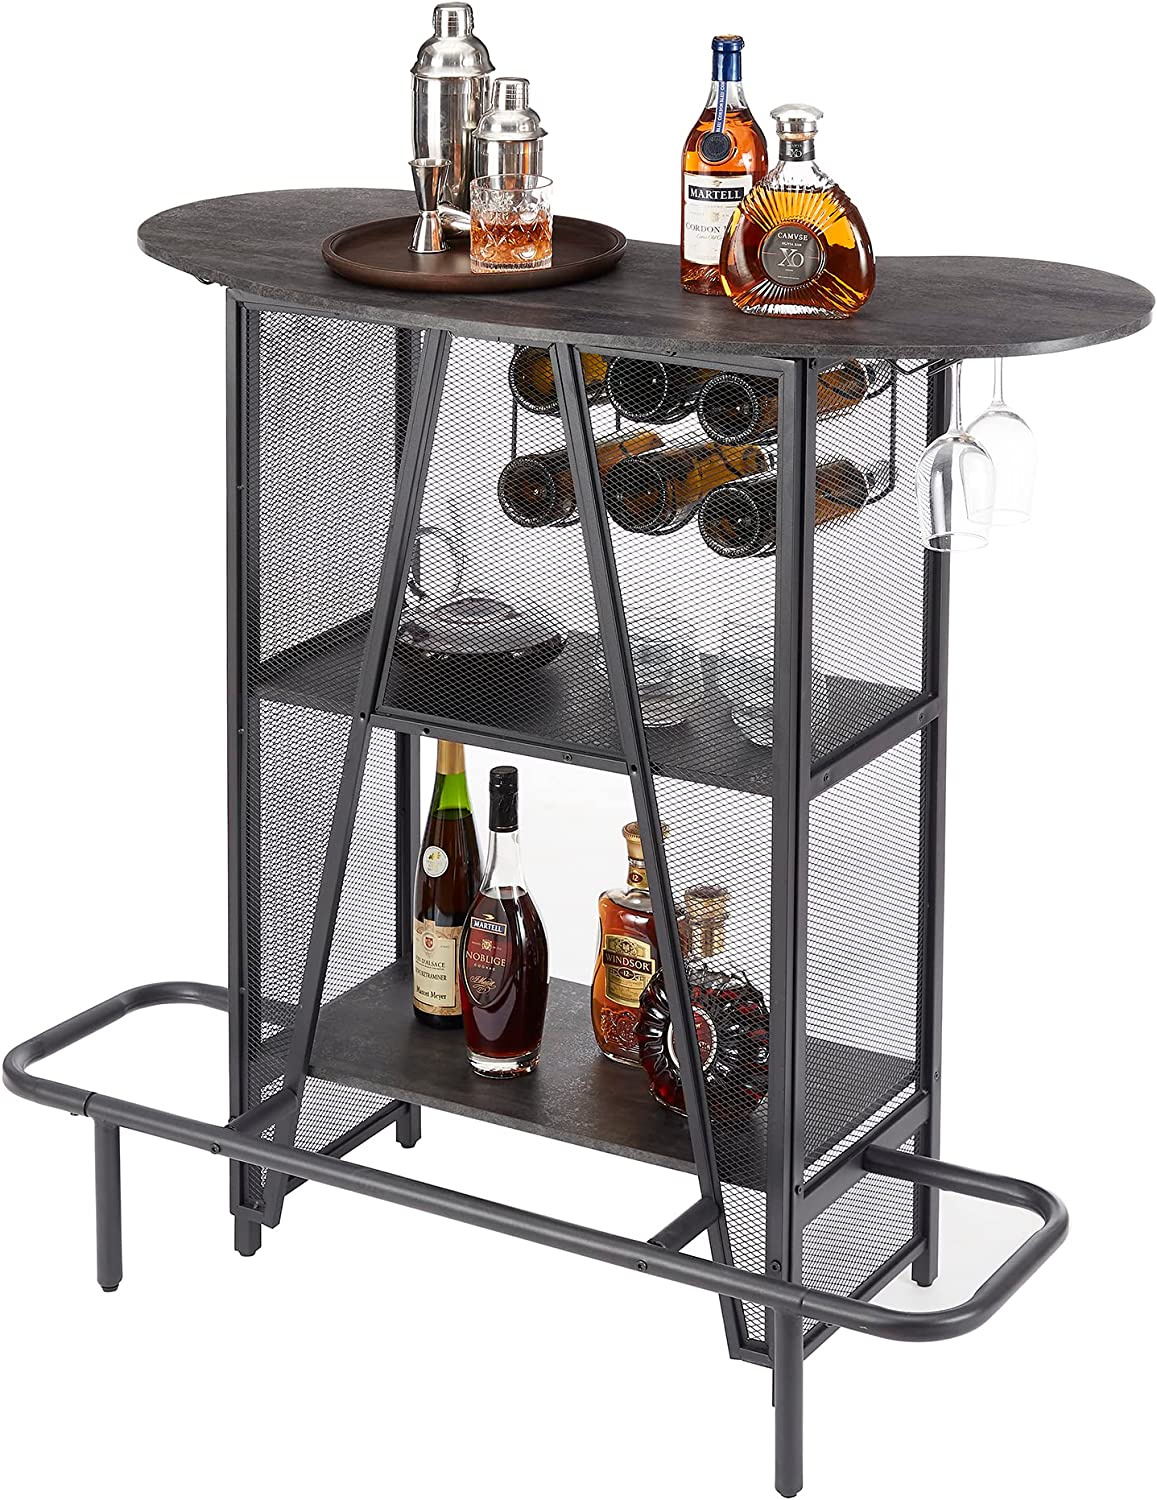 VECELO Bar Unit with Metal Mesh Front, 3-Tier Wine Rack Table with Glasses Holder